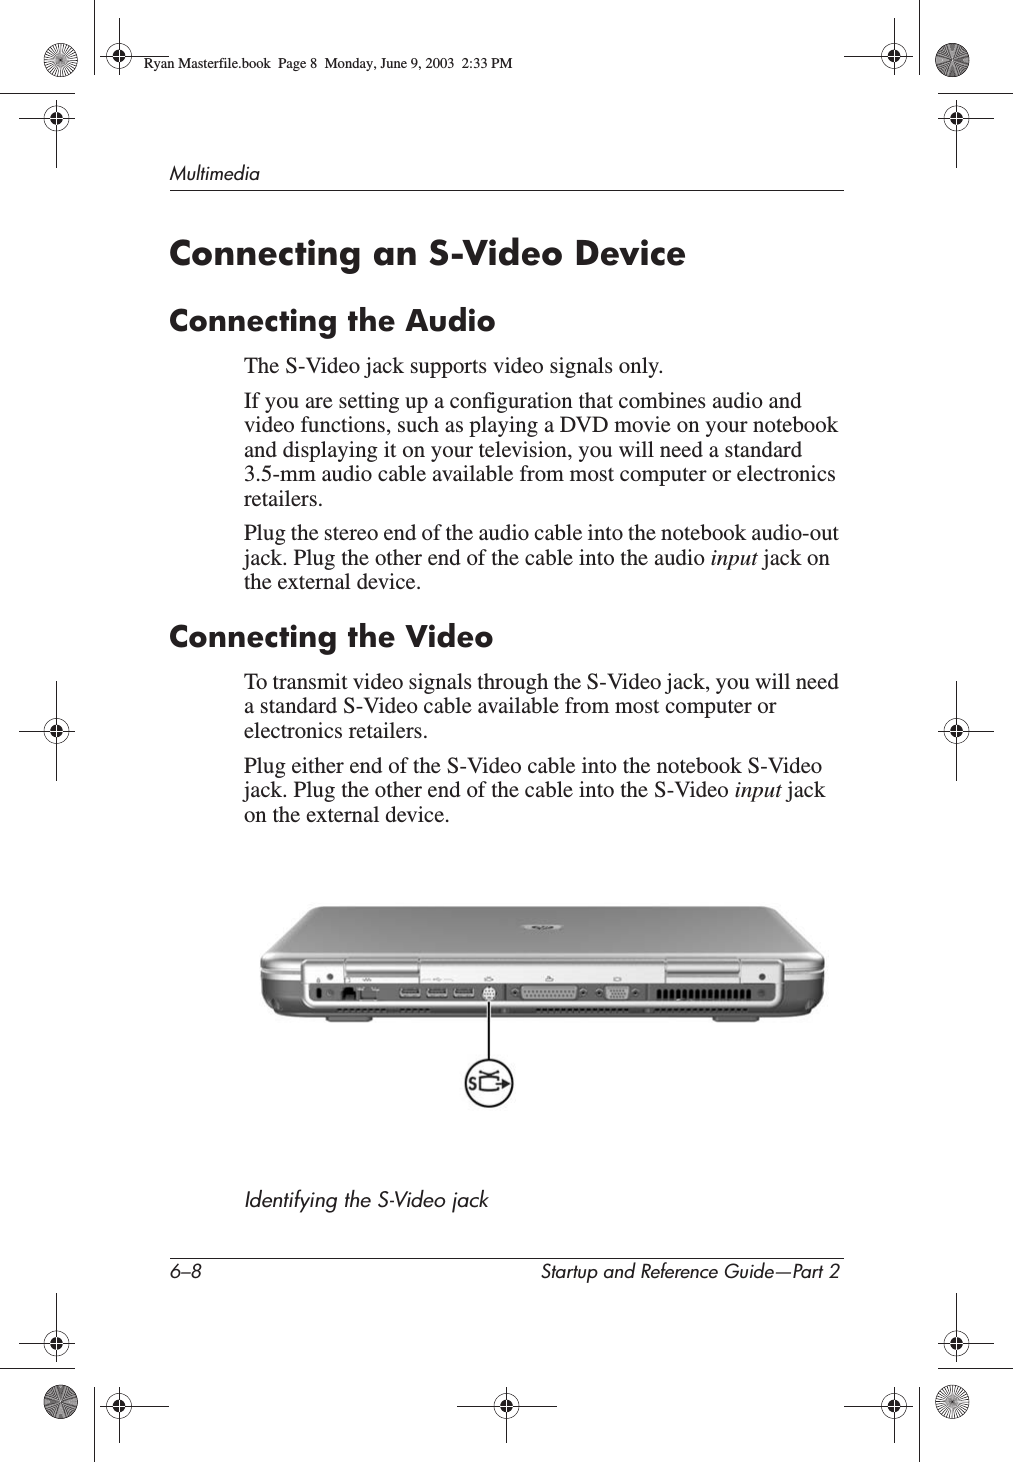 6–8 Startup and Reference Guide—Part 2MultimediaConnecting an S-Video DeviceConnecting the AudioThe S-Video jack supports video signals only. If you are setting up a configuration that combines audio and video functions, such as playing a DVD movie on your notebook and displaying it on your television, you will need a standard 3.5-mm audio cable available from most computer or electronics retailers.Plug the stereo end of the audio cable into the notebook audio-out jack. Plug the other end of the cable into the audio input jack on the external device.Connecting the VideoTo transmit video signals through the S-Video jack, you will need a standard S-Video cable available from most computer or electronics retailers. Plug either end of the S-Video cable into the notebook S-Video jack. Plug the other end of the cable into the S-Video input jack on the external device.Identifying the S-Video jackRyan Masterfile.book  Page 8  Monday, June 9, 2003  2:33 PM